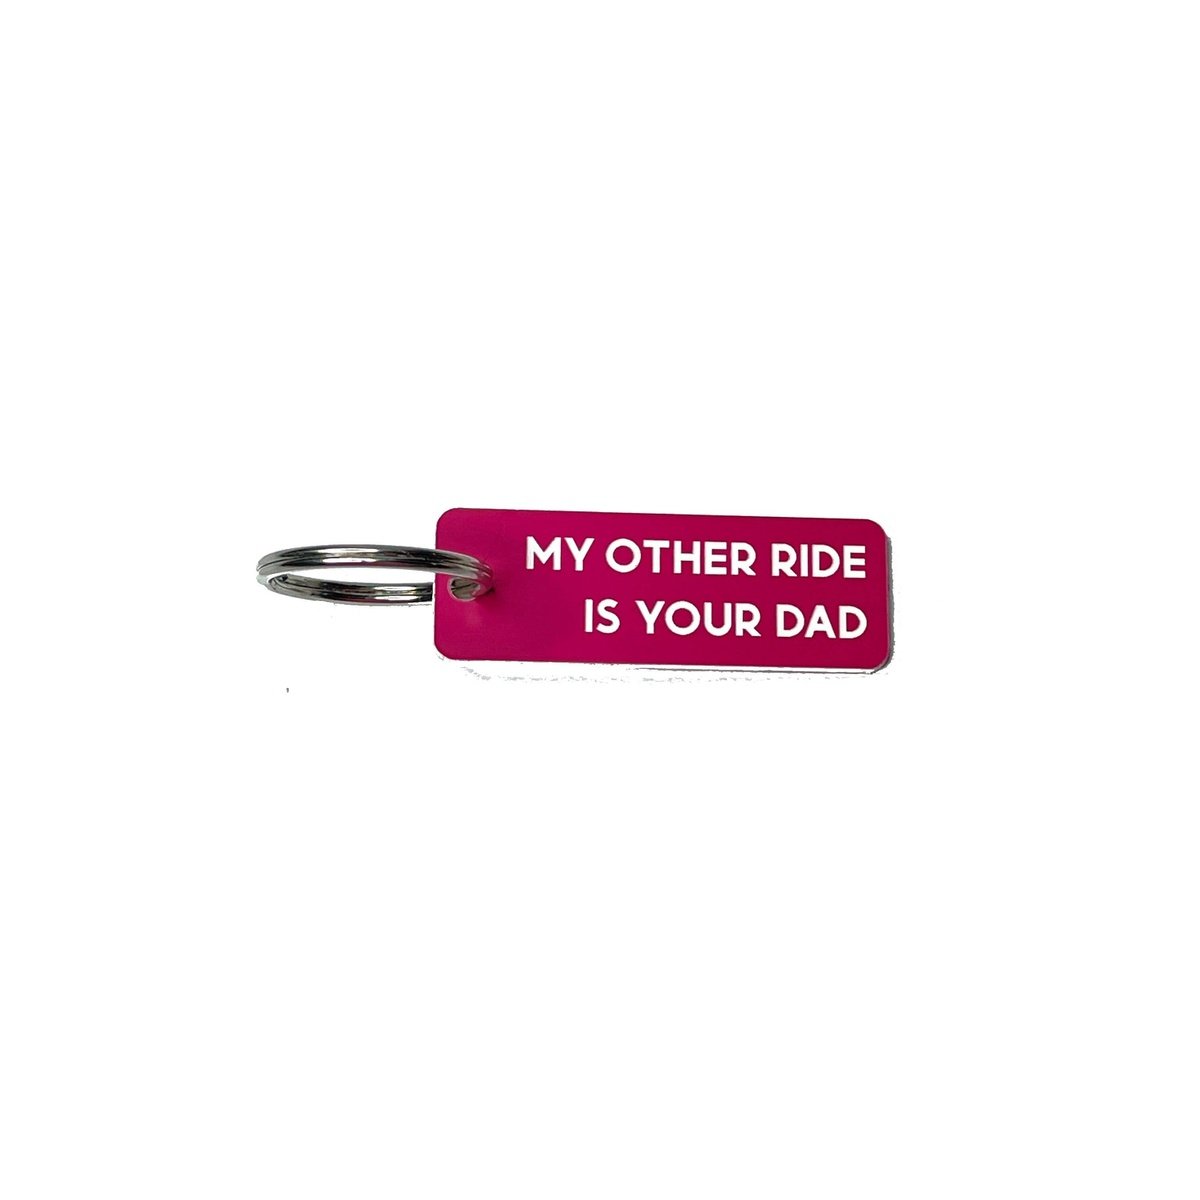 My Other Ride is Your Dad - Acrylic Key Tag: Pink/White